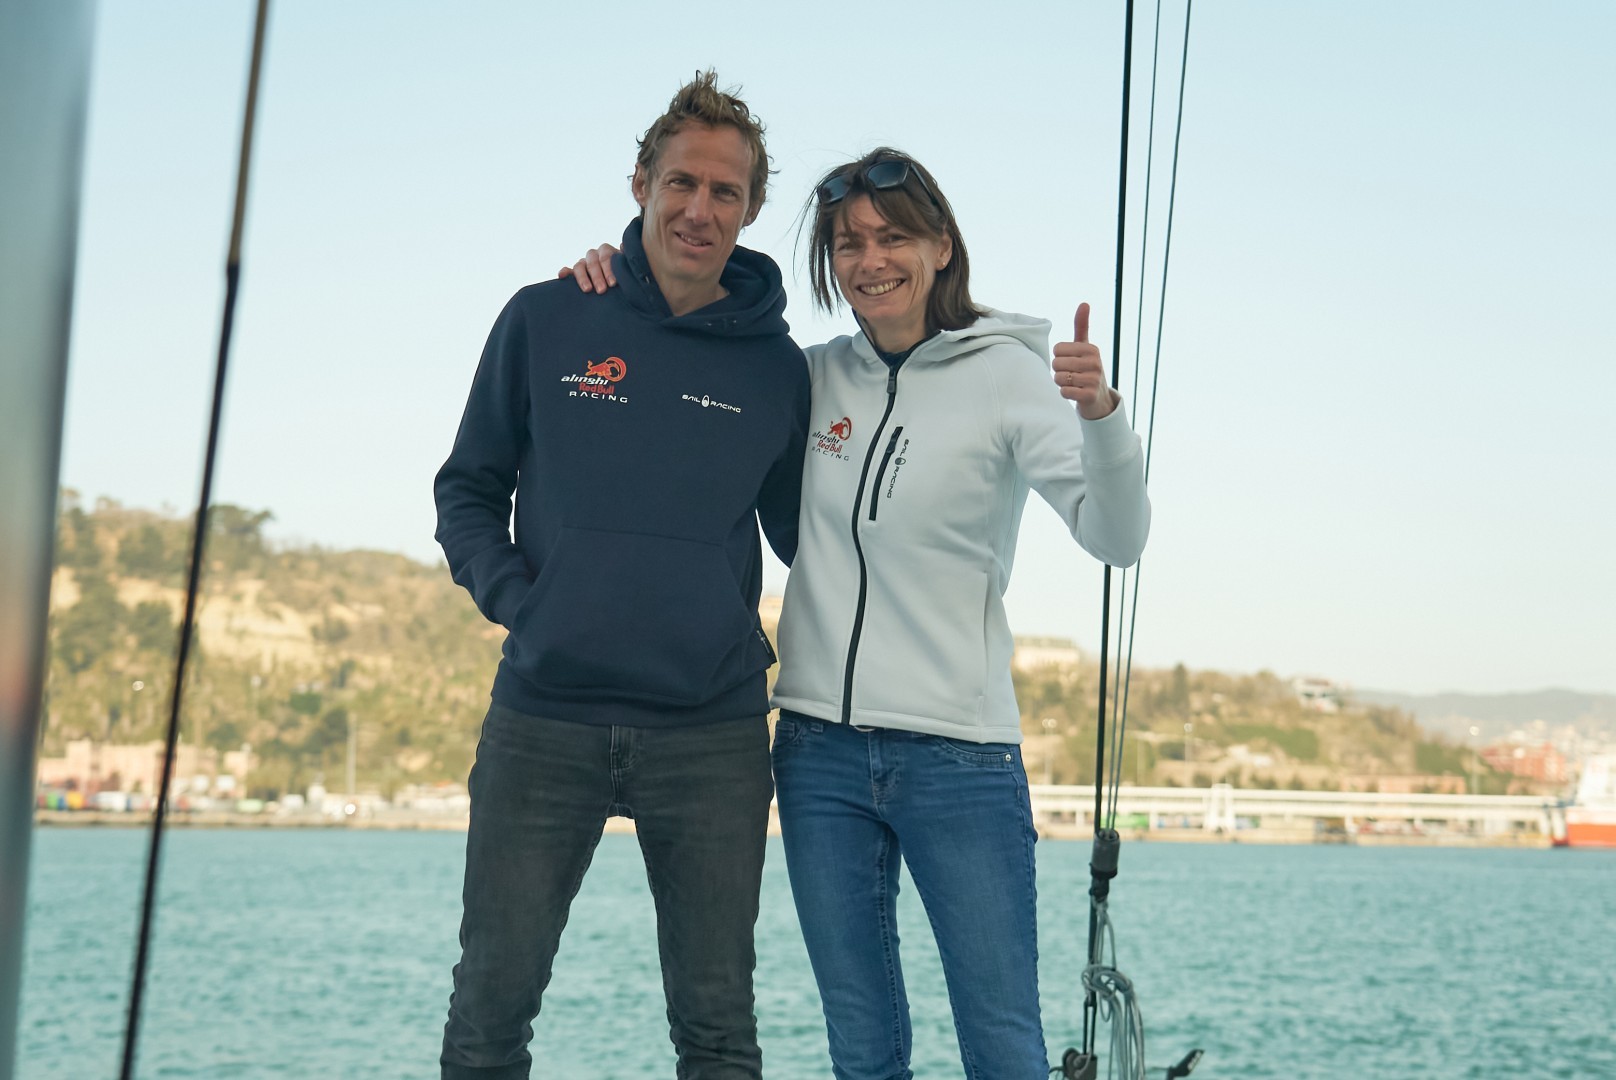 Alinghi apre le candidature per Youth & Women's America's Cup